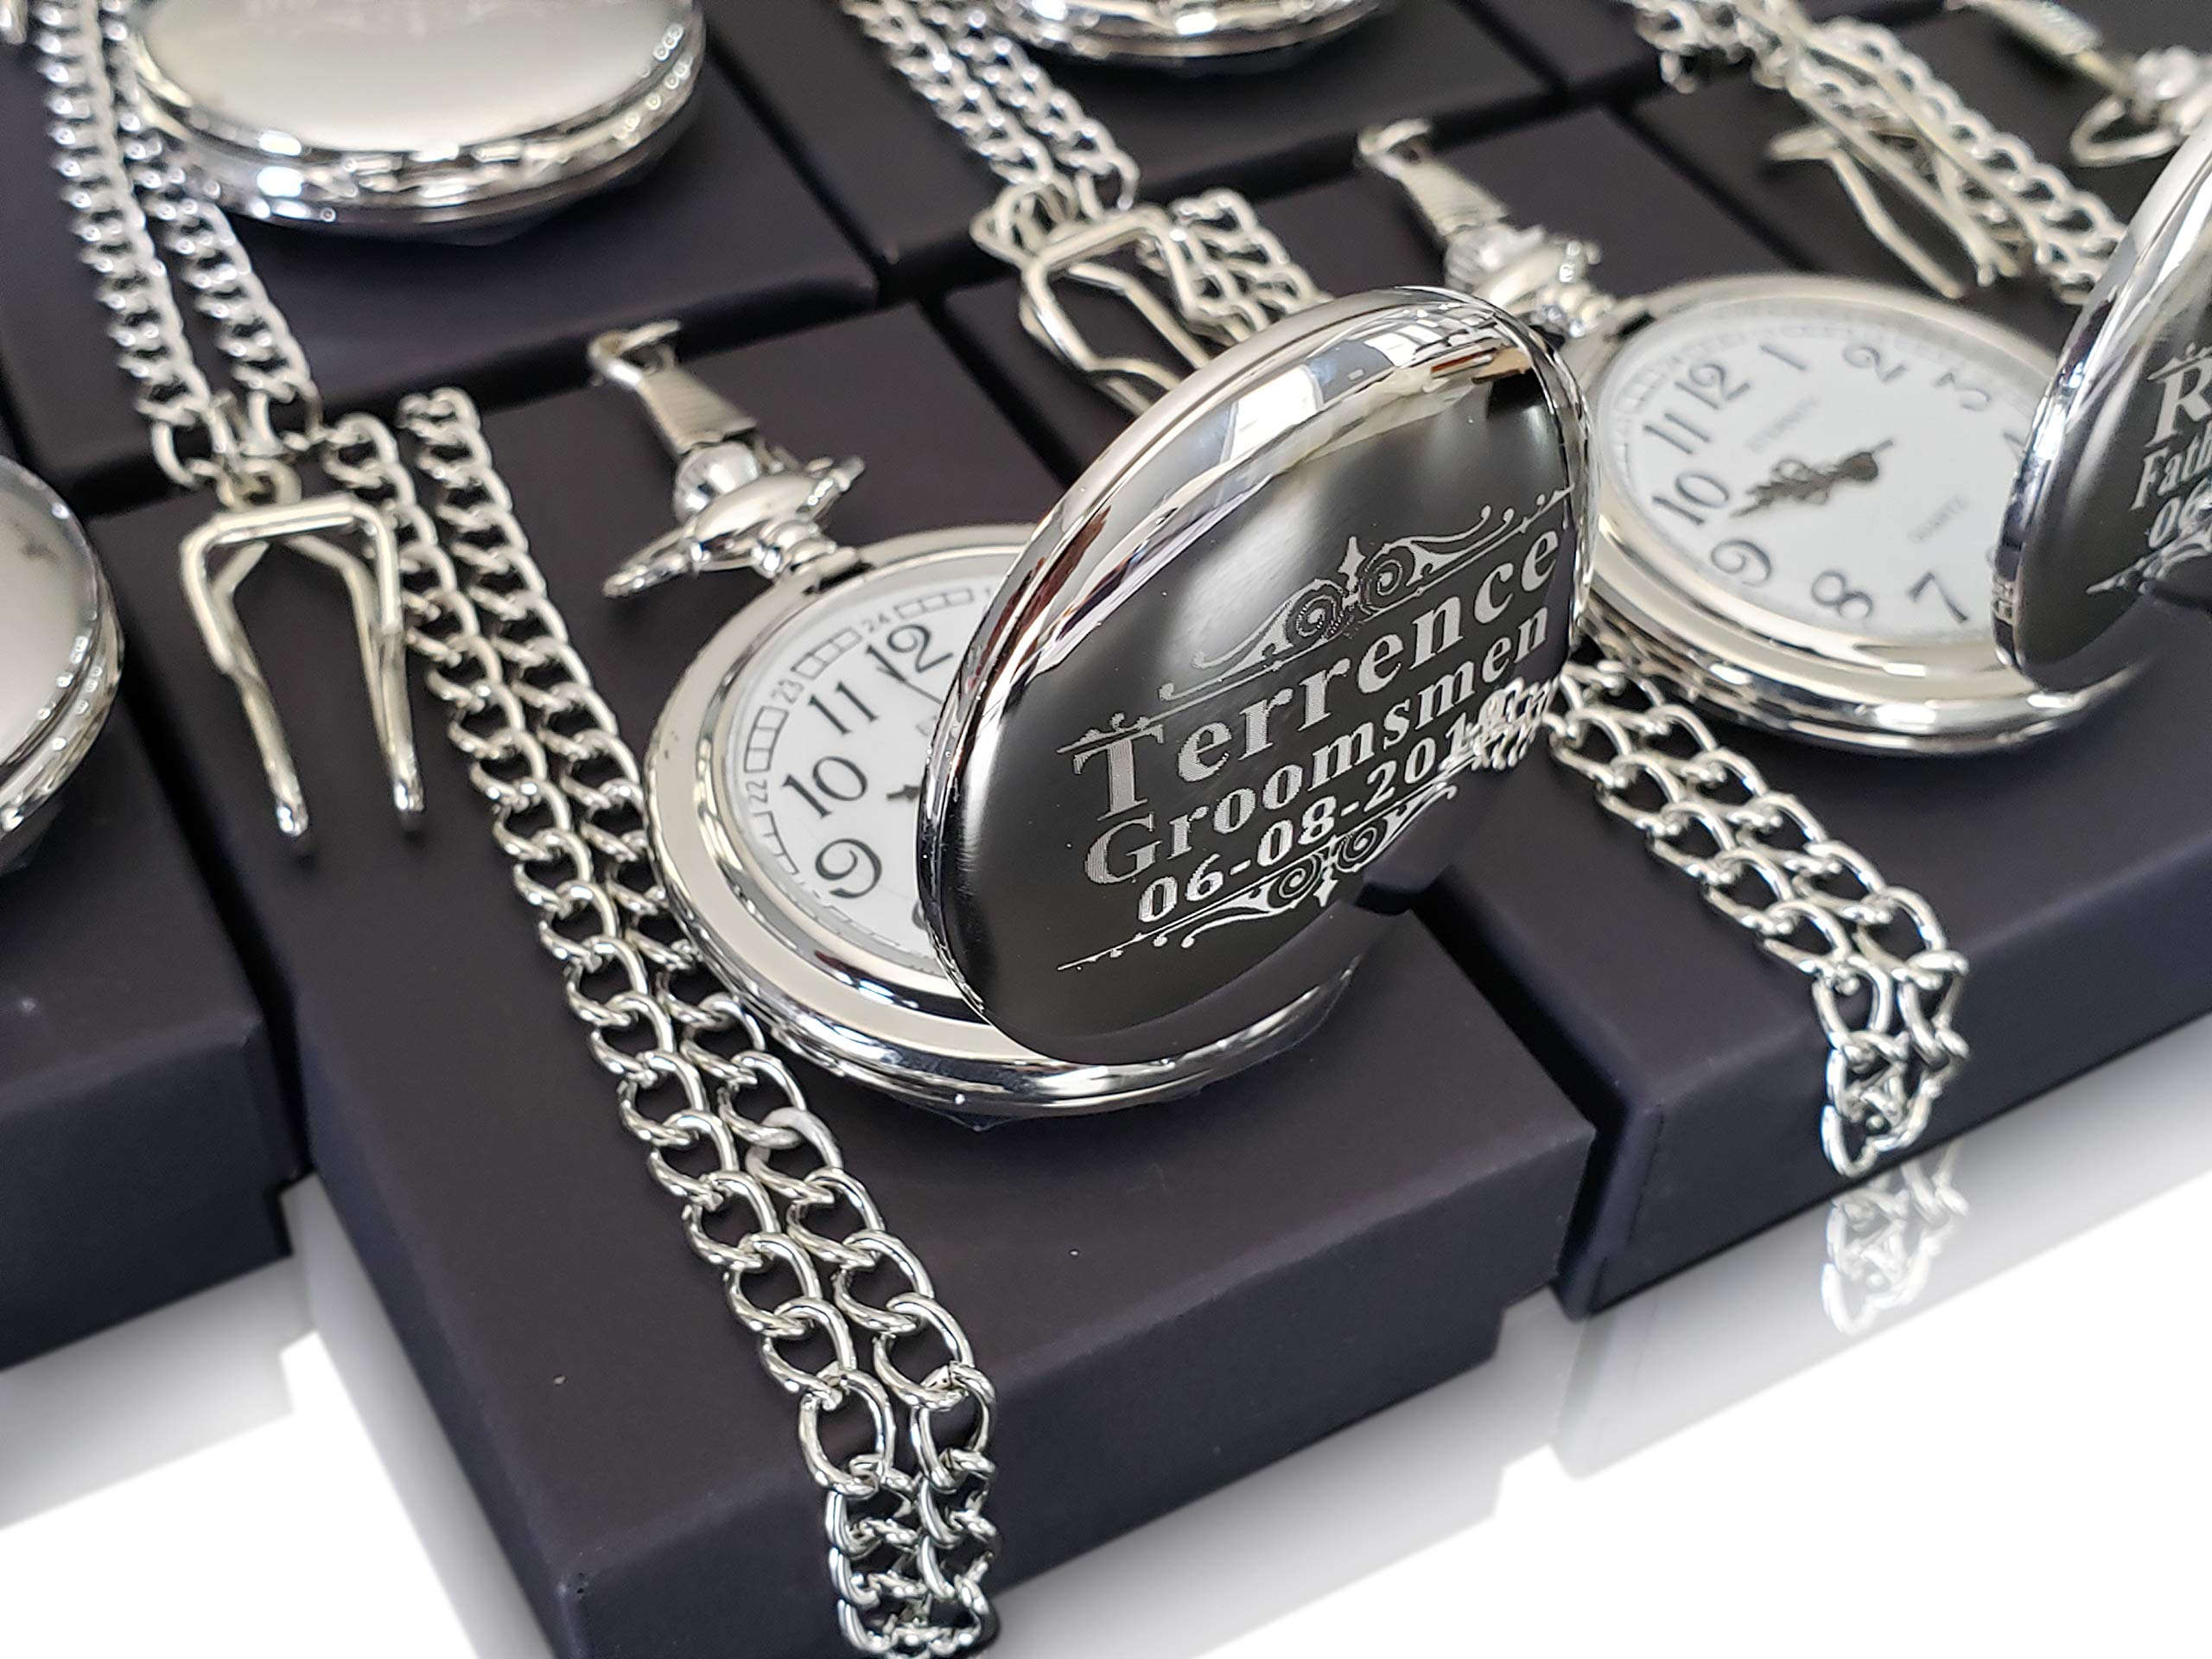 Eternity Engraving inc. 8 Engraved Pocket Watches Custom Fitted Box Included, Buckle Chain, Engraving Included. Pocket Watch, Battery Included, Assorted Colors Set of 8